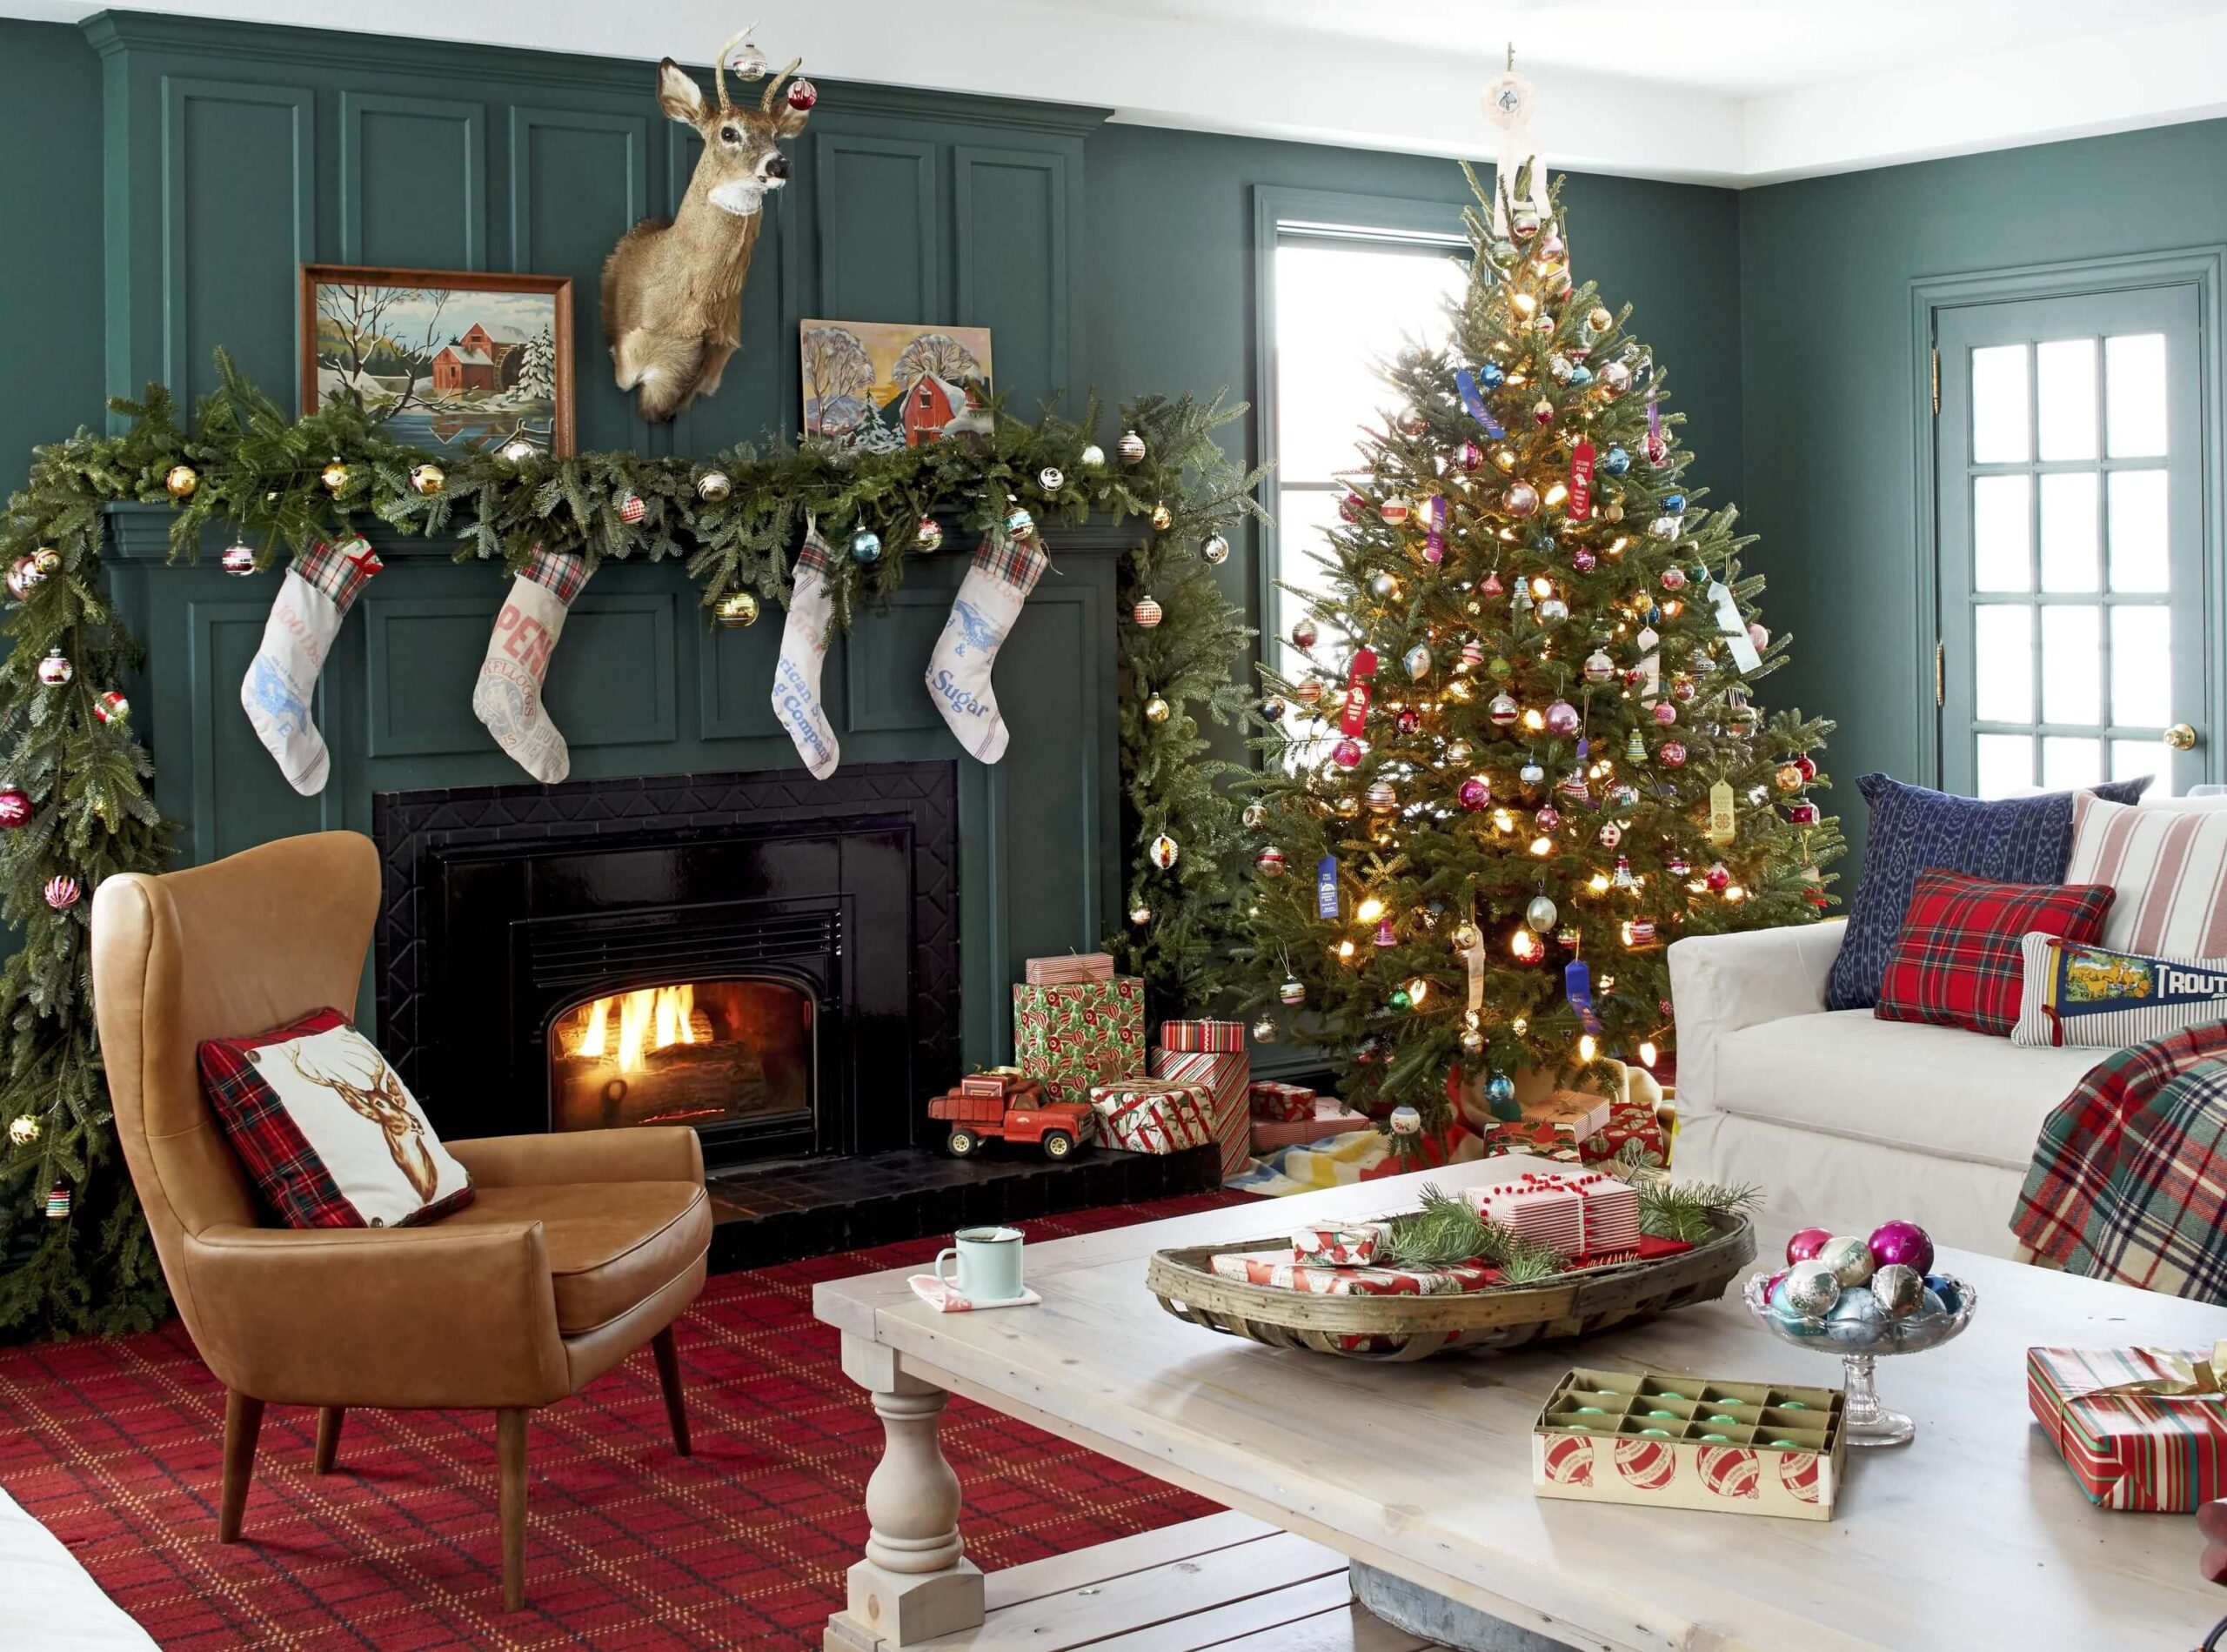 Decorating for the Holidays While Selling a House